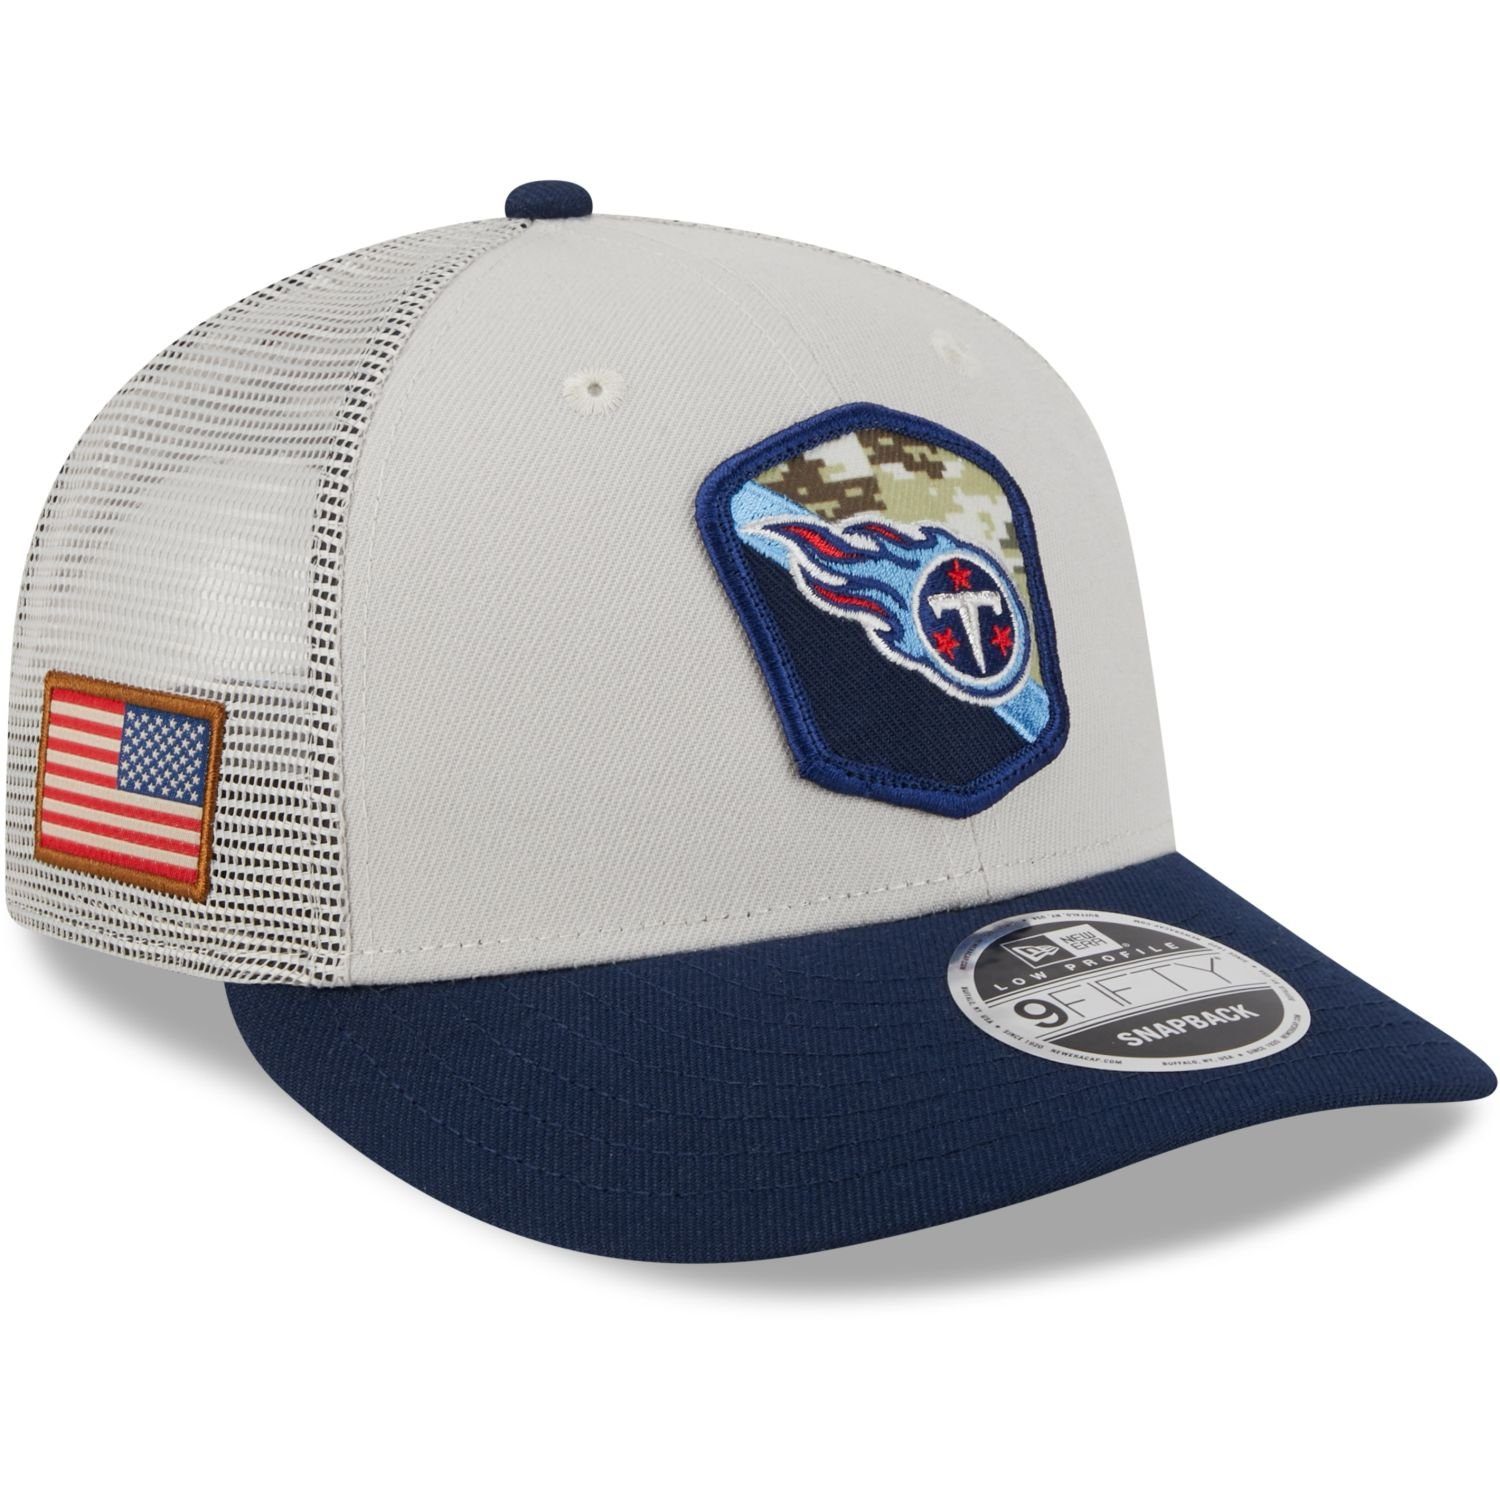 Salute Profile Service 9Fifty Low New Cap Era to Snapback NFL Snap